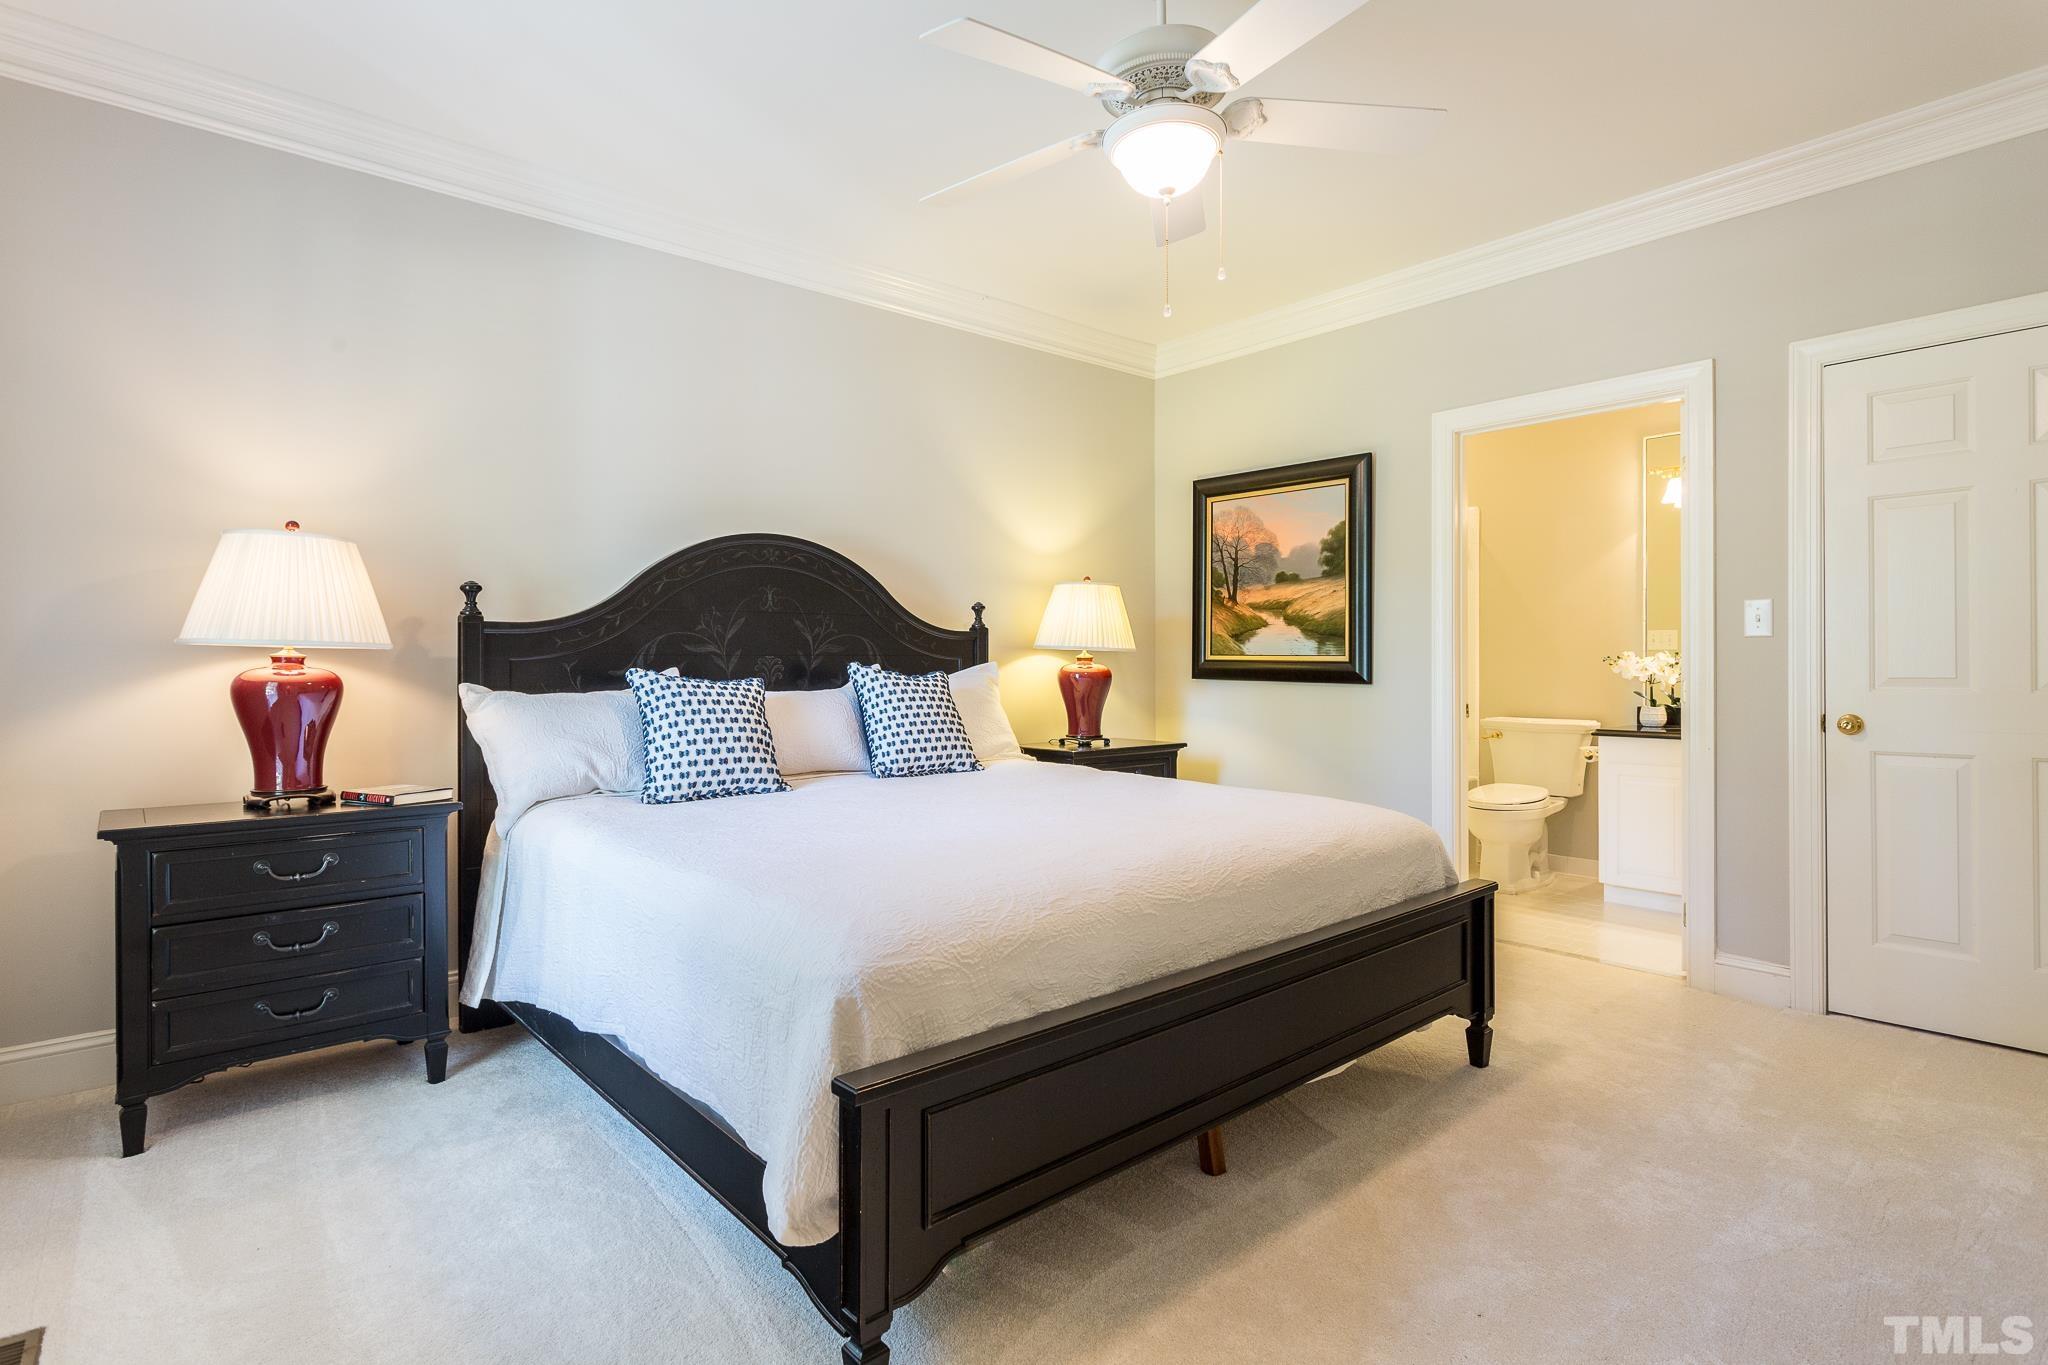 The 1st floor bedroom offers 2 closets and a full bath with walk-in shower.